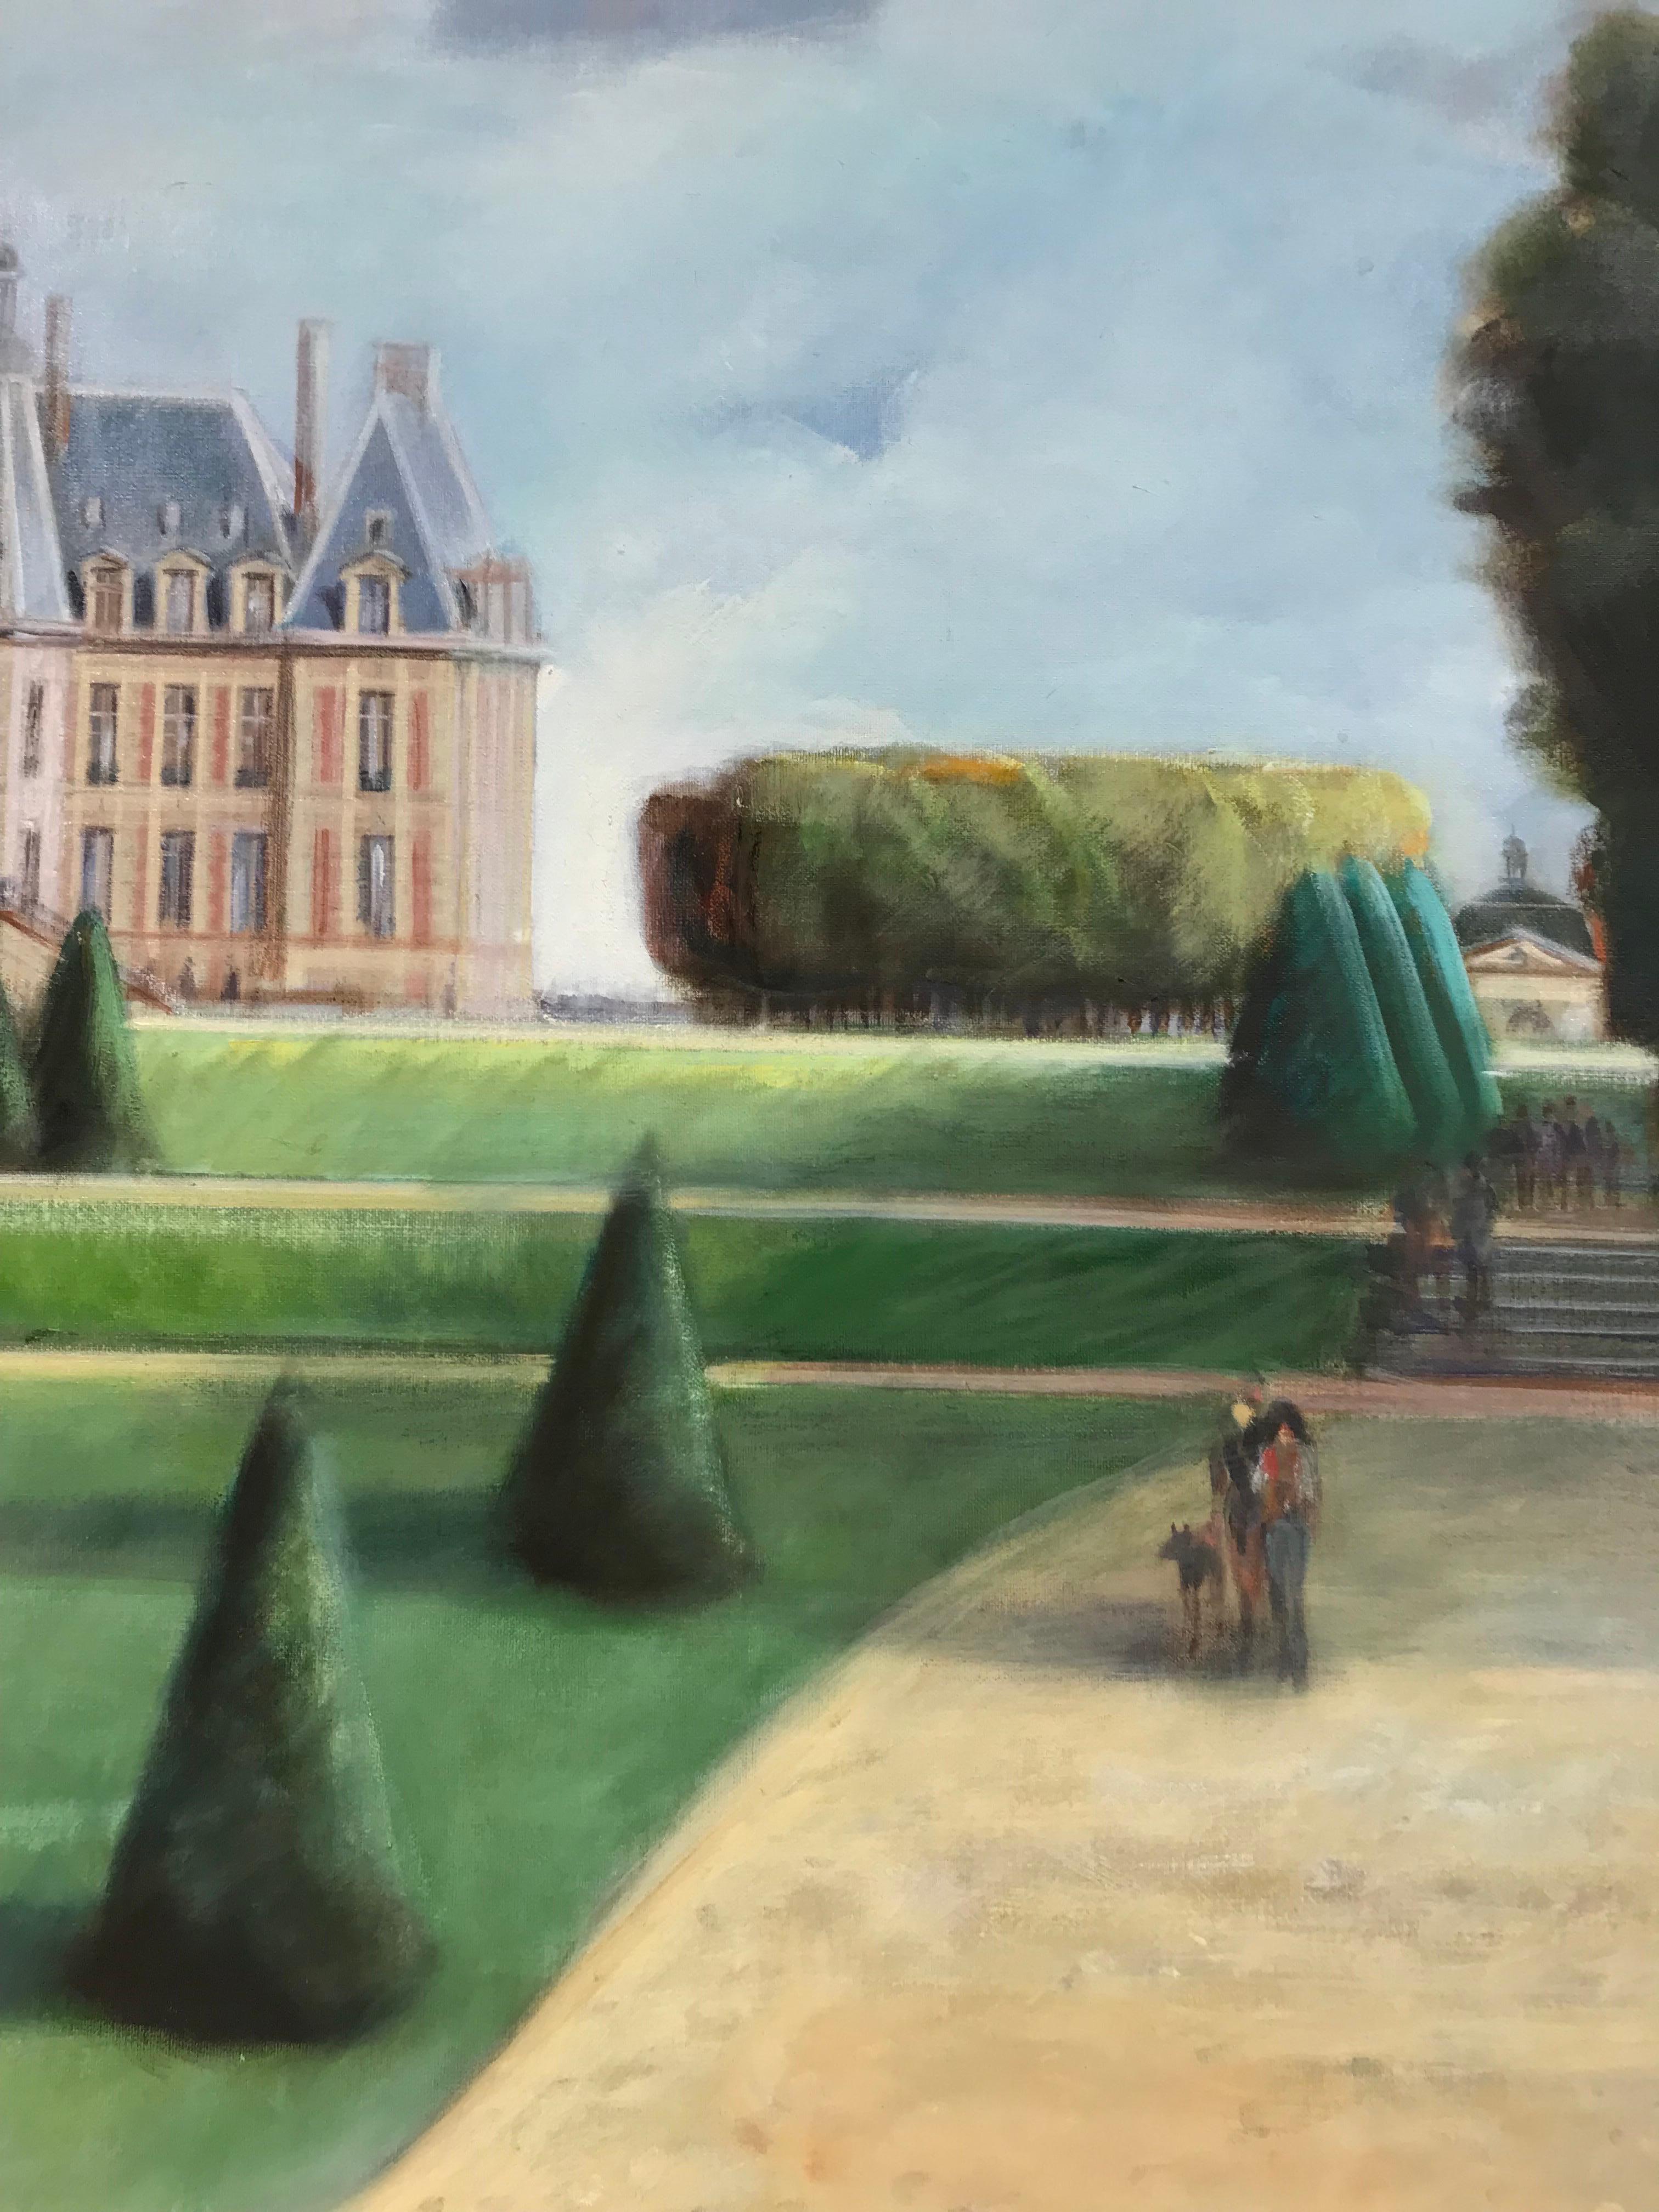 Artist/ School: French School, circa 2007, indistinctly signed and dated

Title: Chateau de Sceaux

Medium: oil painting on canvas, unframed, signed

canvas: 19.75 x 24 inches

Provenance: private collection, France

Condition: The painting is in